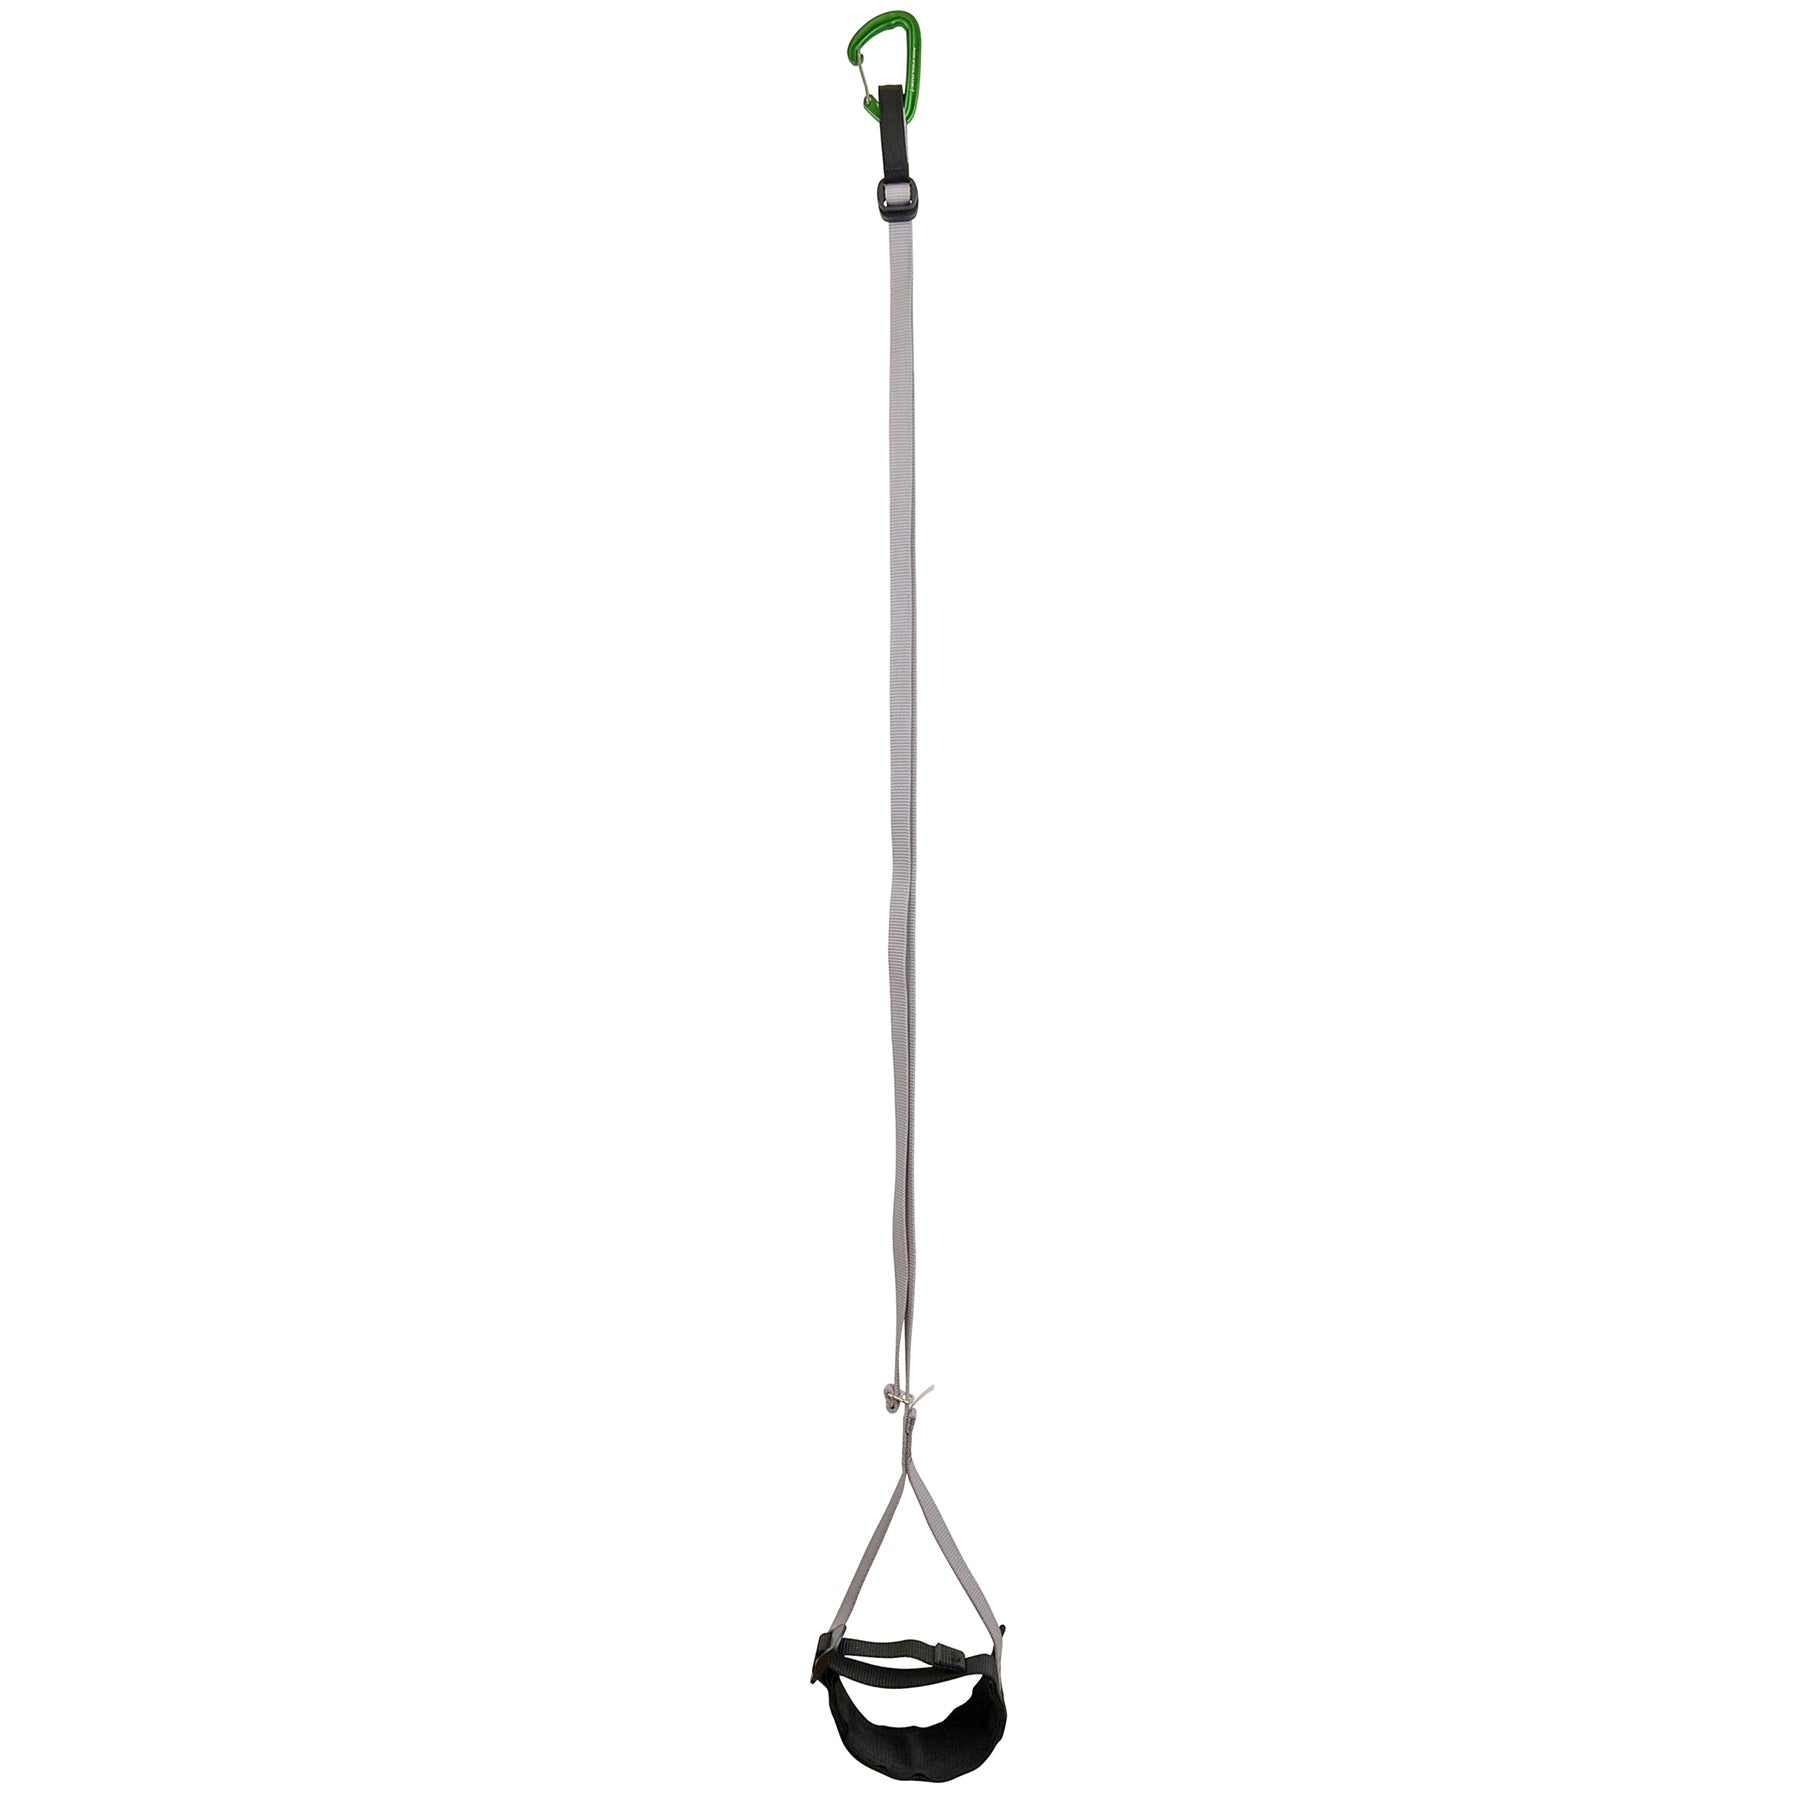 A full view photo of the metolius easy aider 